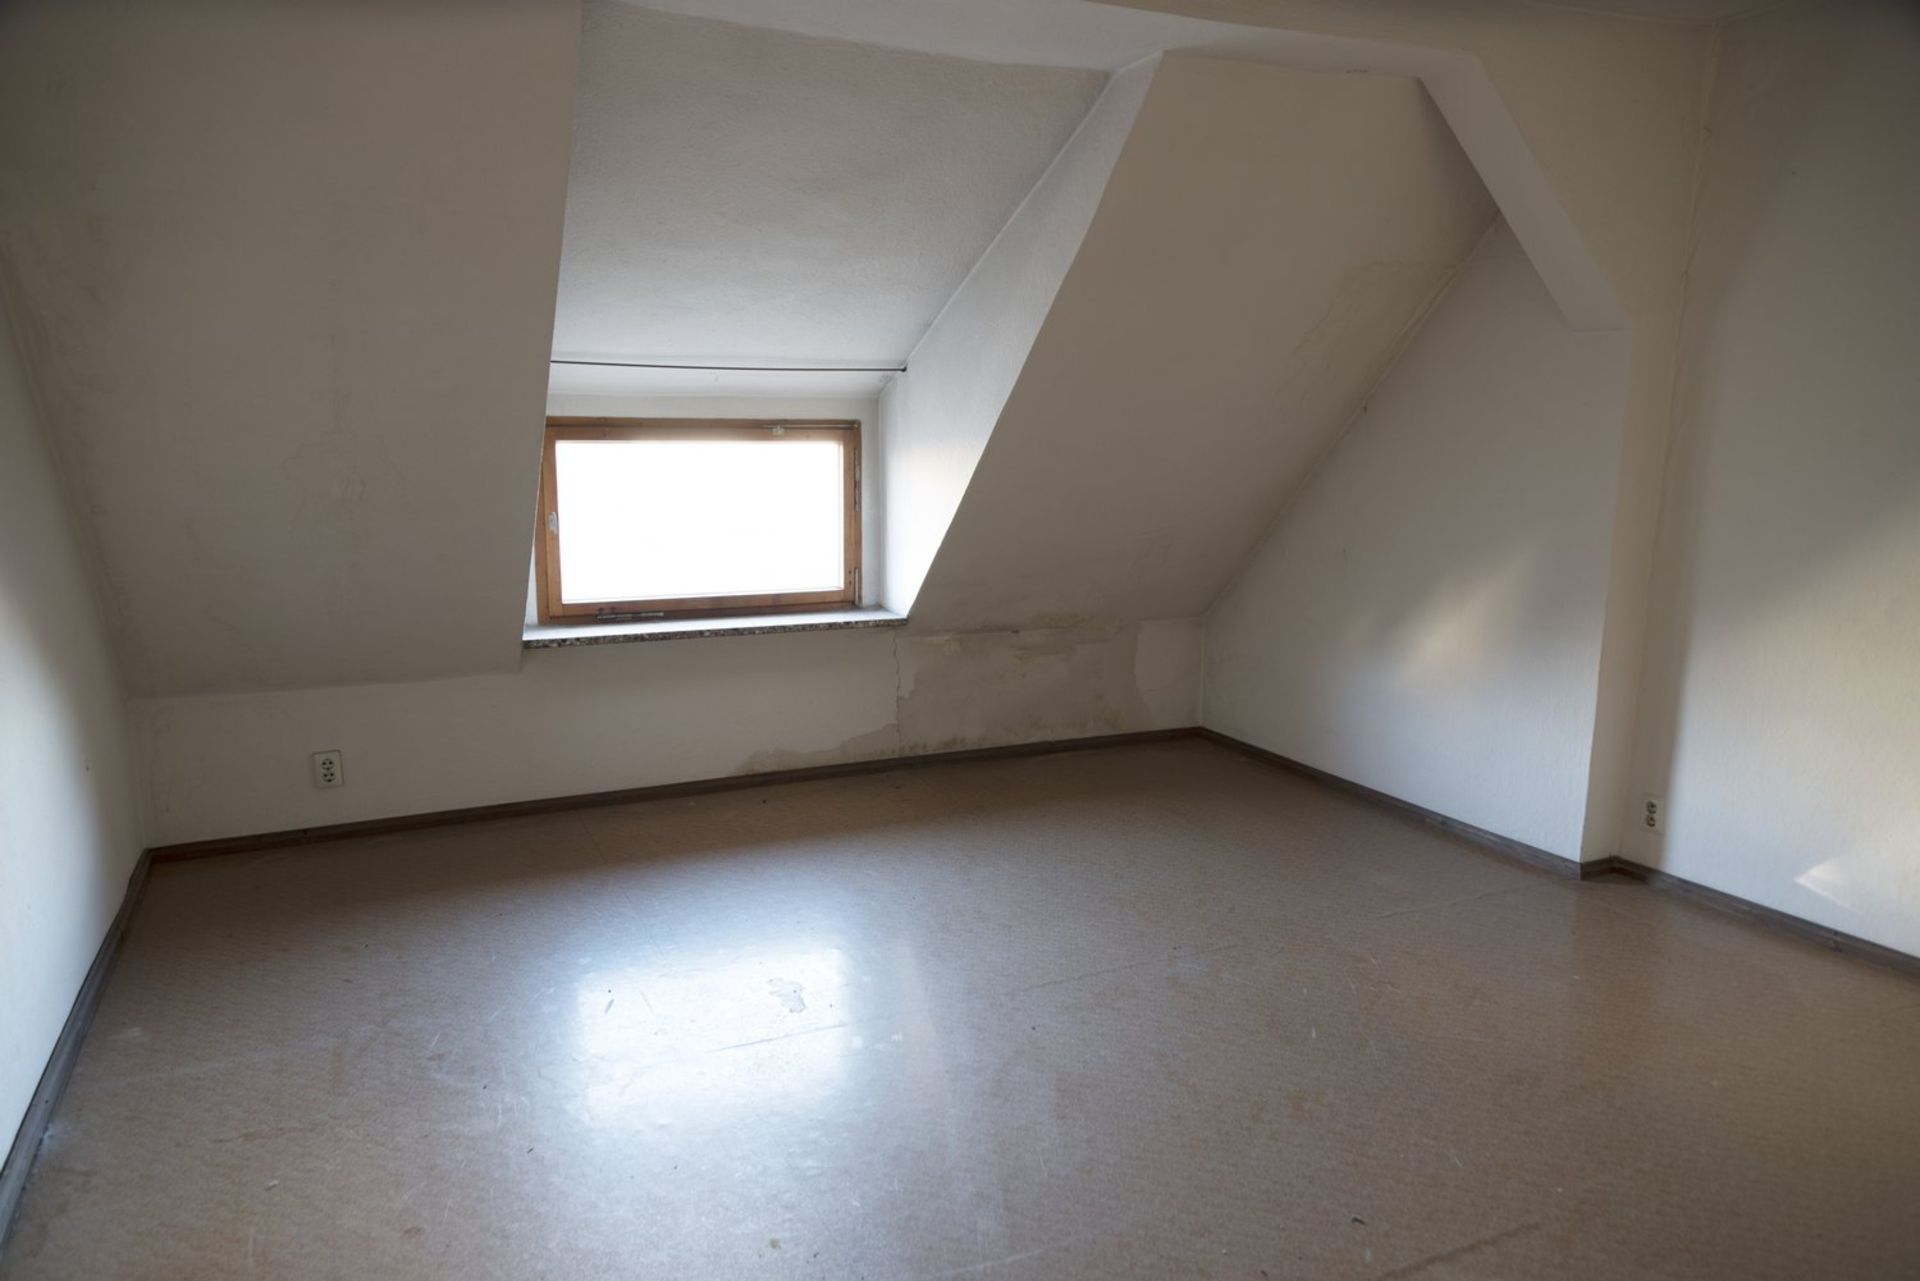 4 STOREY GERMANY APARTMENT BLOCK IN ADDITION TO A FULL BASEMENT + HUGE ATTIC! - Image 45 of 76